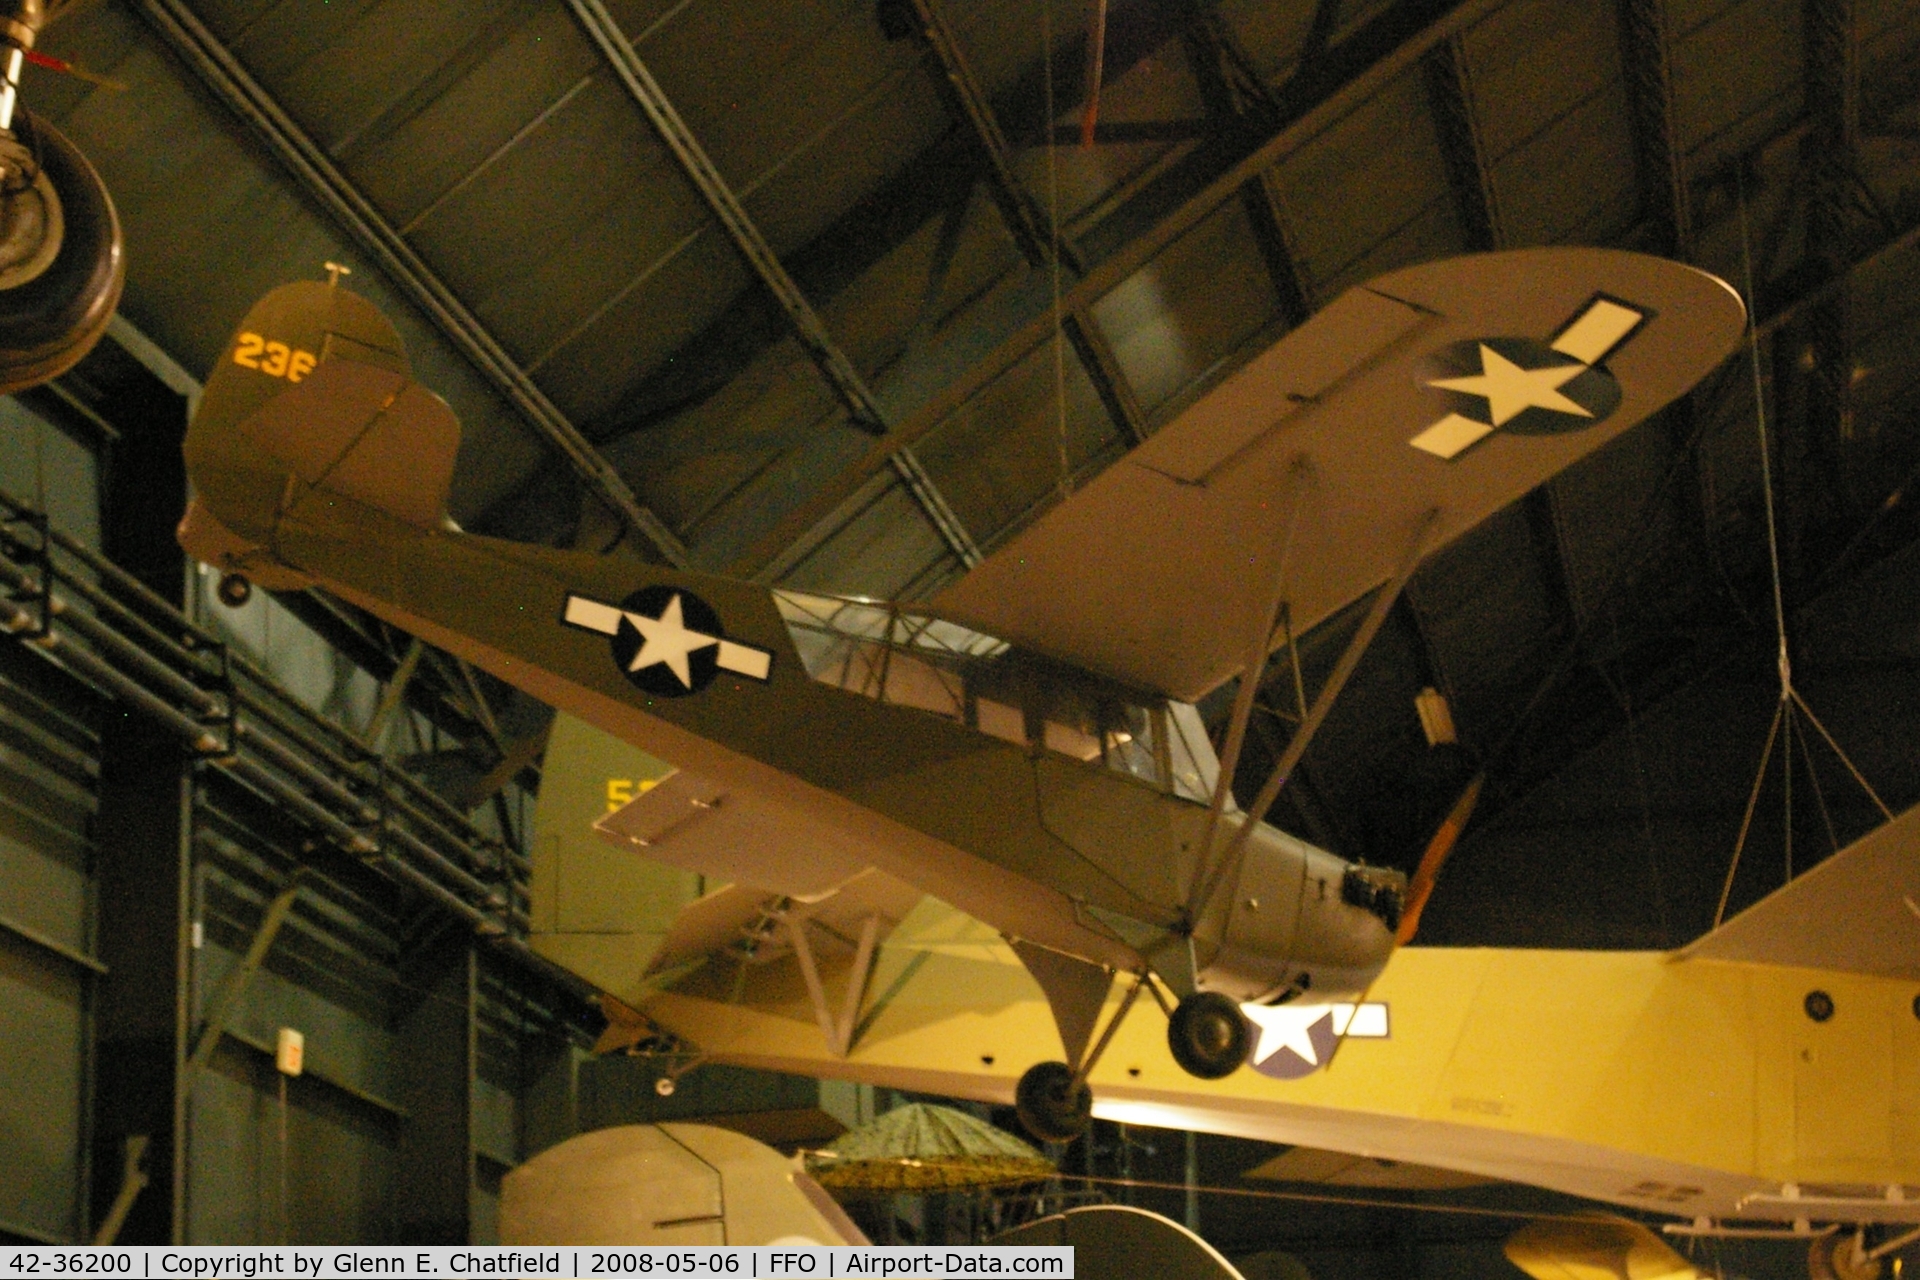 42-36200, 1942 Aeronca L-3B Grasshopper C/N Not found 42-36200, Hanging from the ceiling in the National Museum of the U.S. Air Force